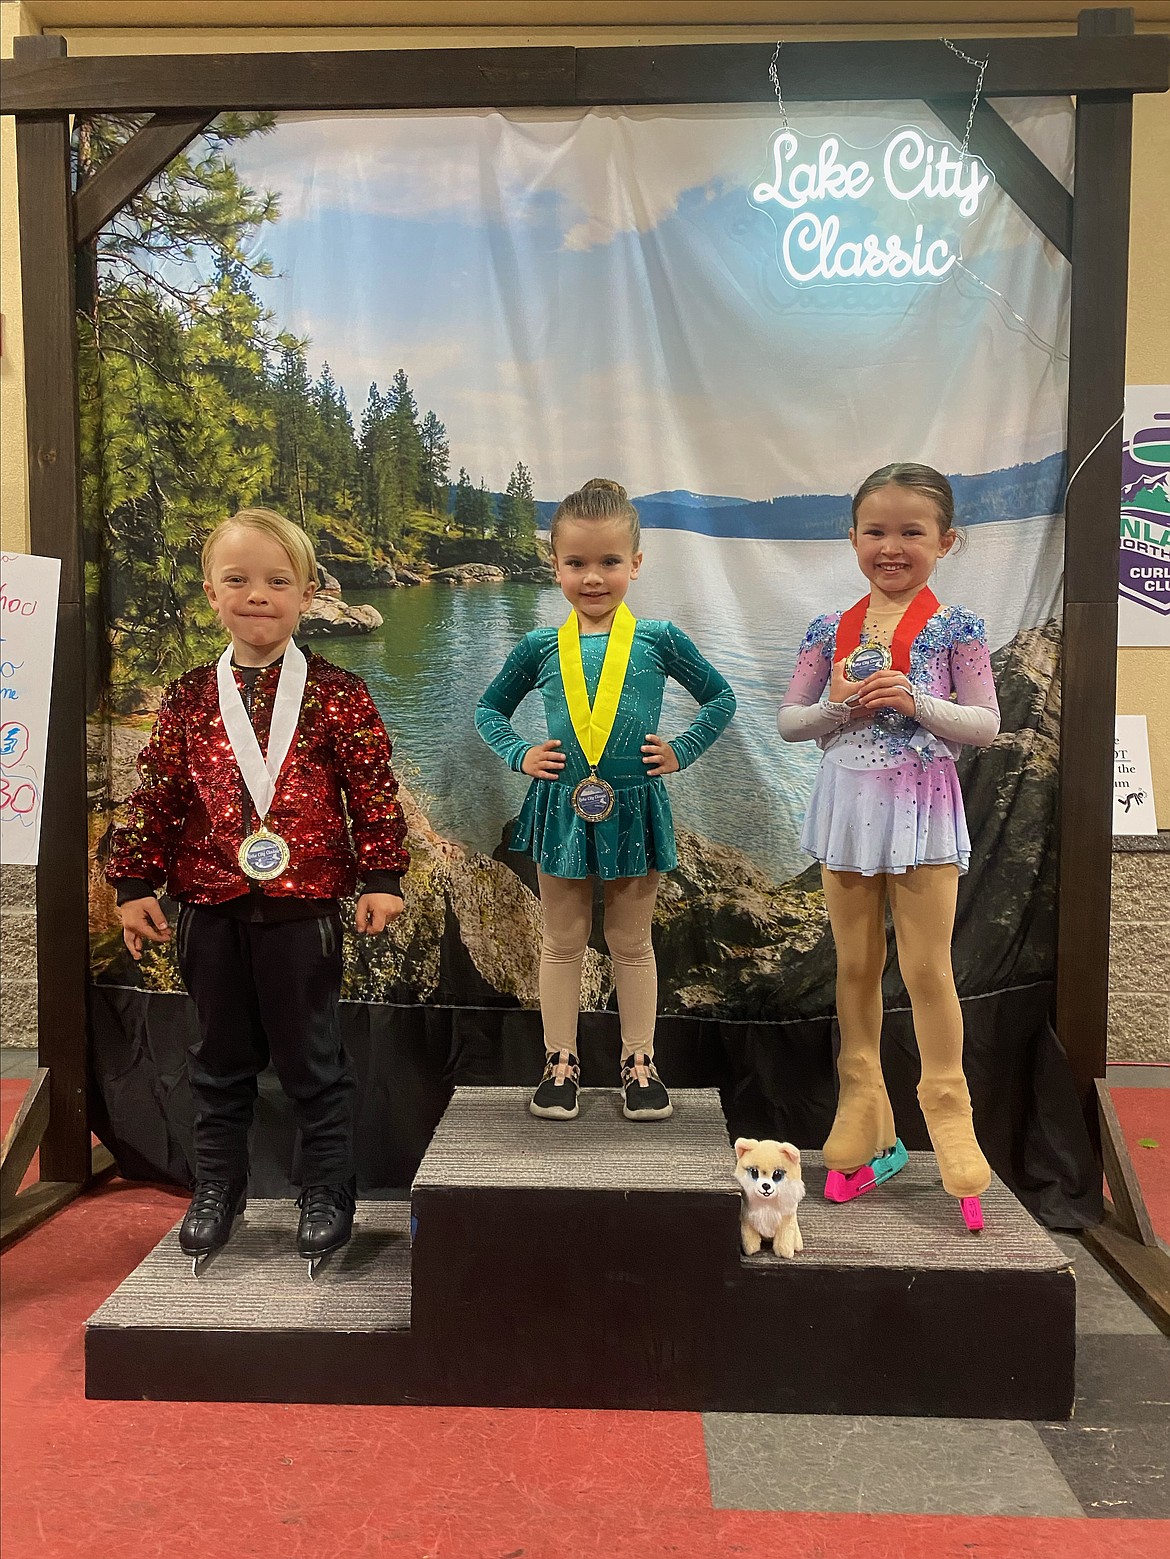 Courtesy photo
From left, Archie Clutter, Emersyn Reis and Hazel Wolters, part of the Lake City Figure Skating program of the Spokane Figure Skating Club, which hosted the Lake City Classic on May 17-19 at the Frontier Ice Arena in Coeur d'Alene.